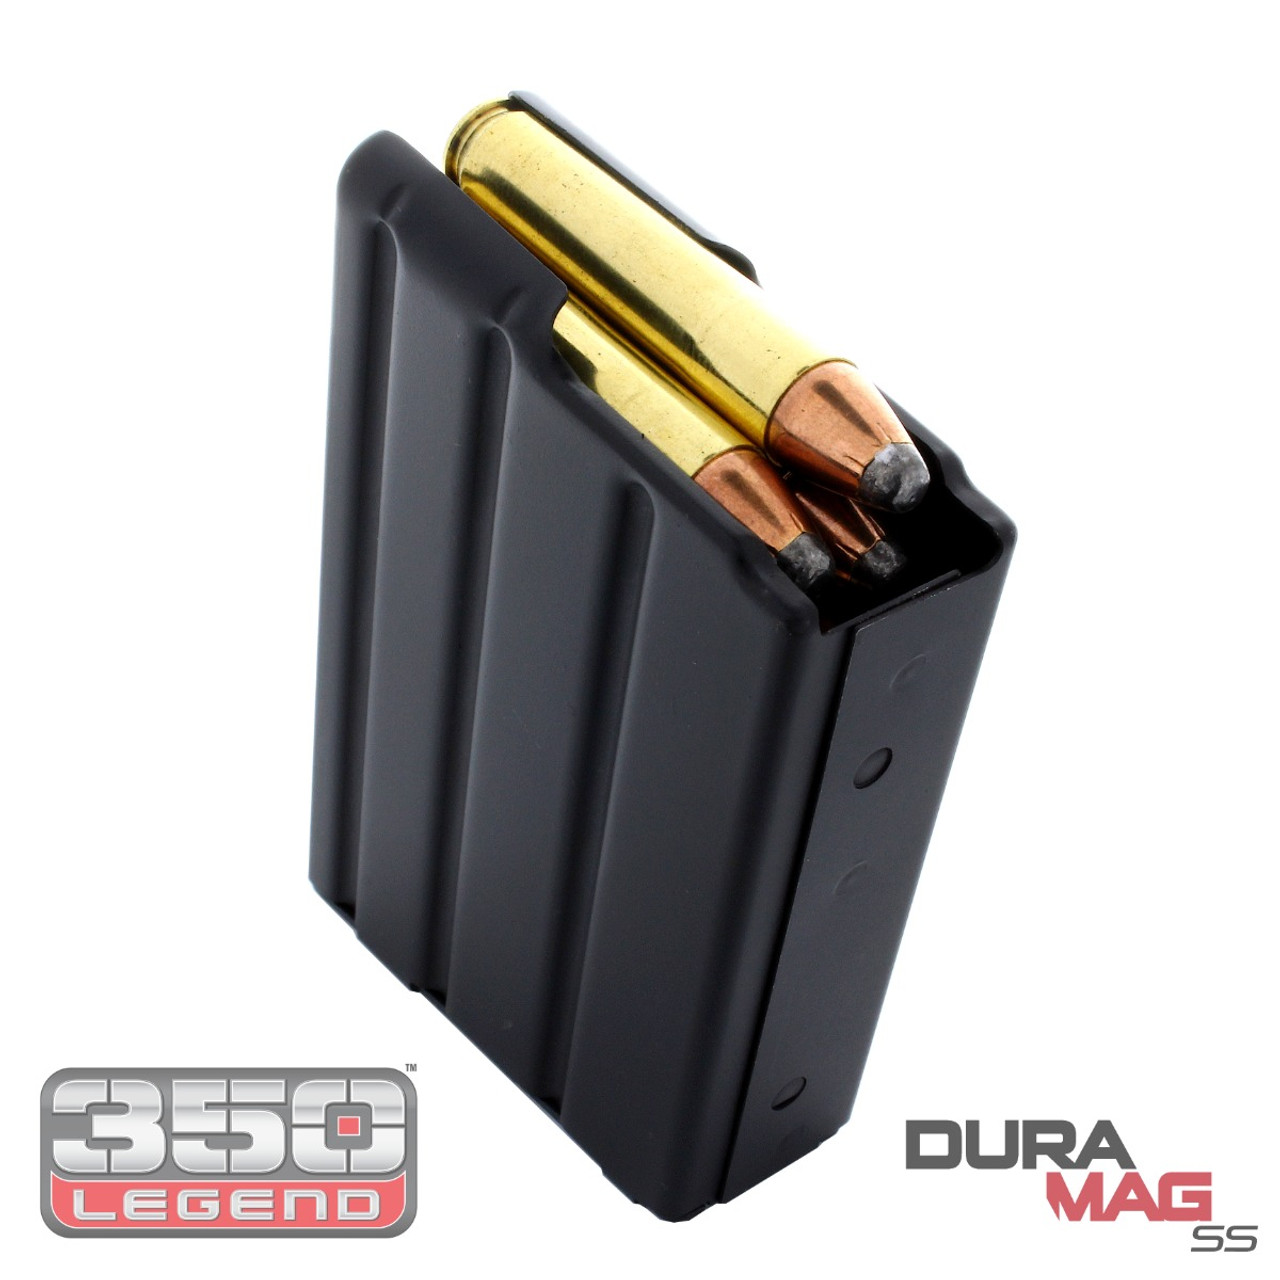 CPD 5/10-round Magazine for AR-15 Stainless Straight Body Black 350 LEGEND